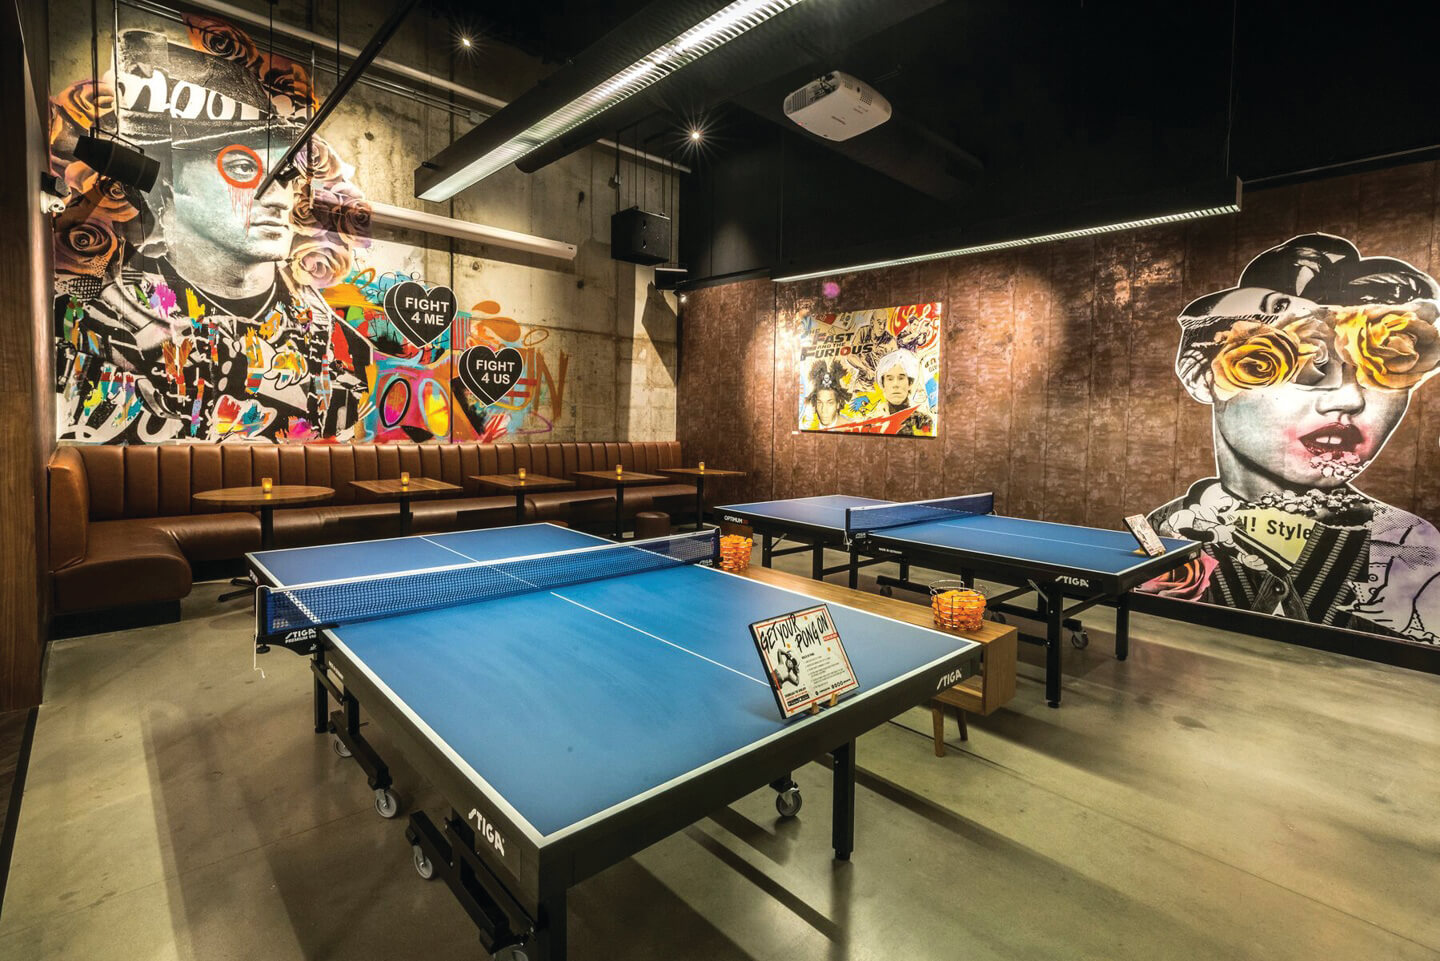 Two blue ping pong tables in front of colorful, graffiti-like murals on walls with booths and tables